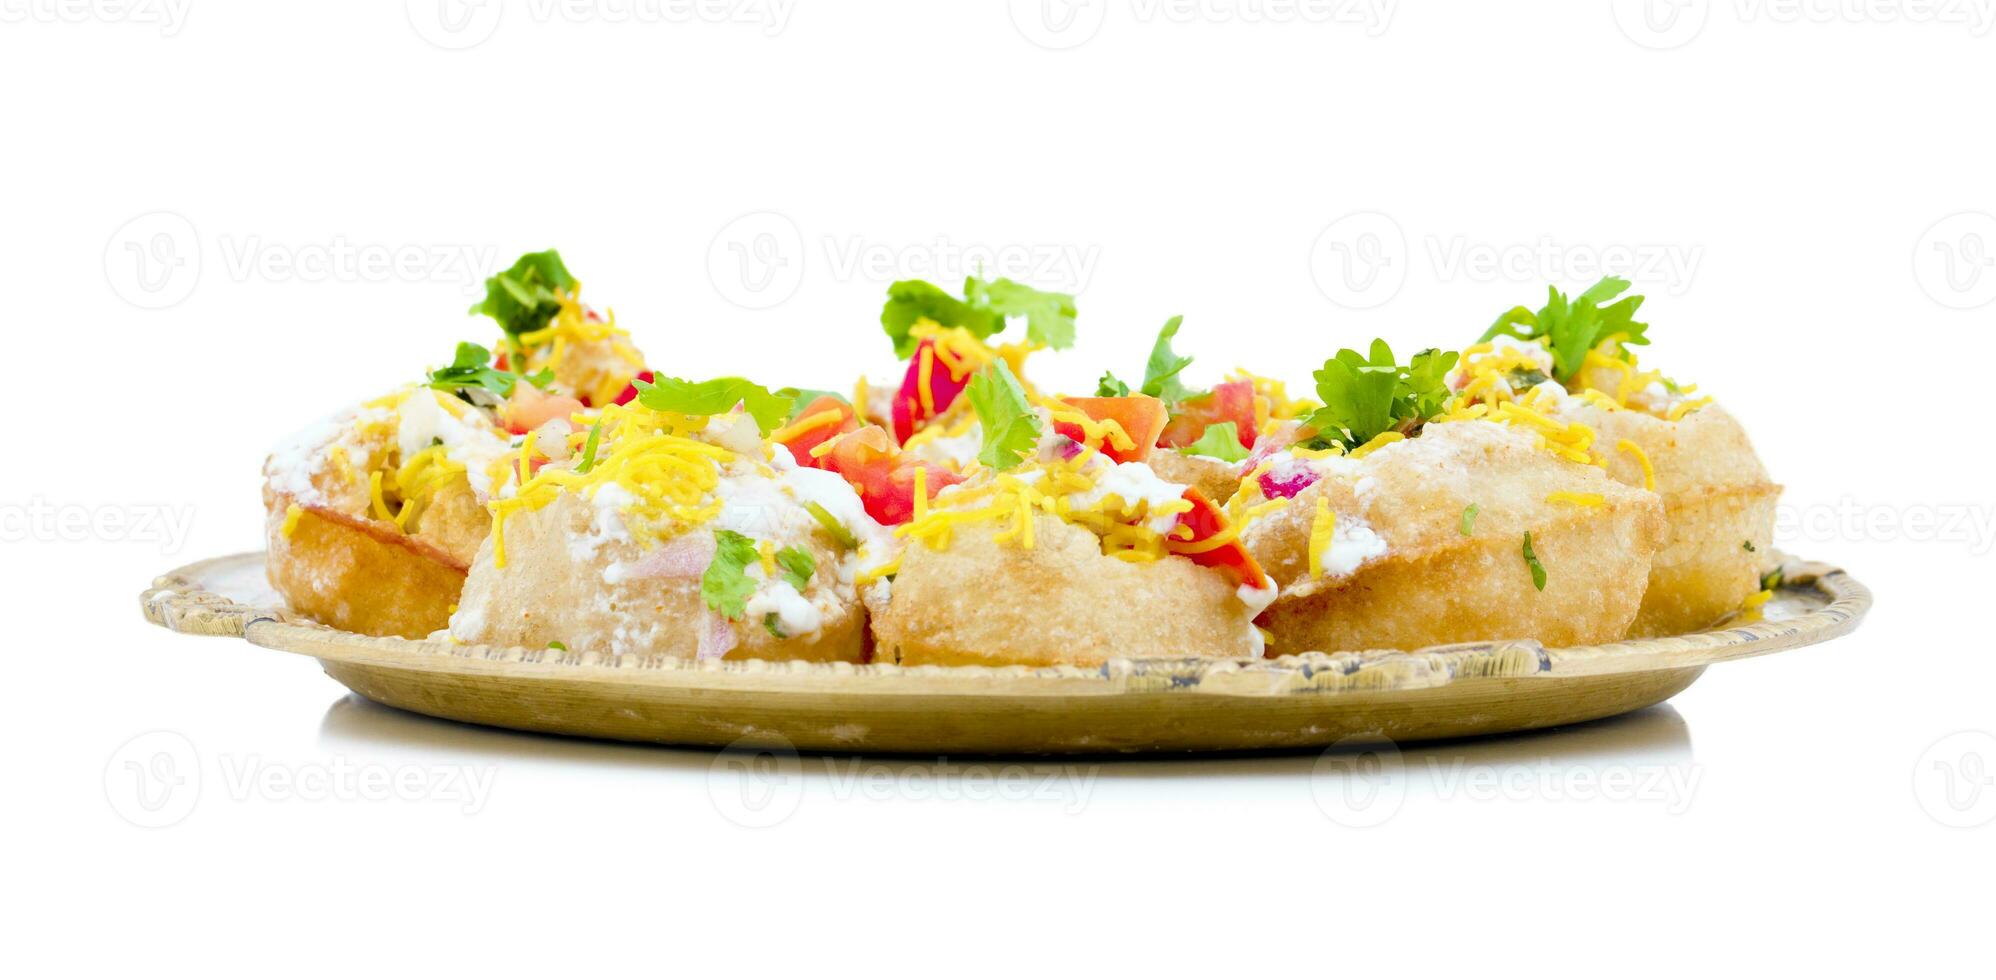 Indian Sweet And Spicy Chaat item Dahi Puri on White Background photo